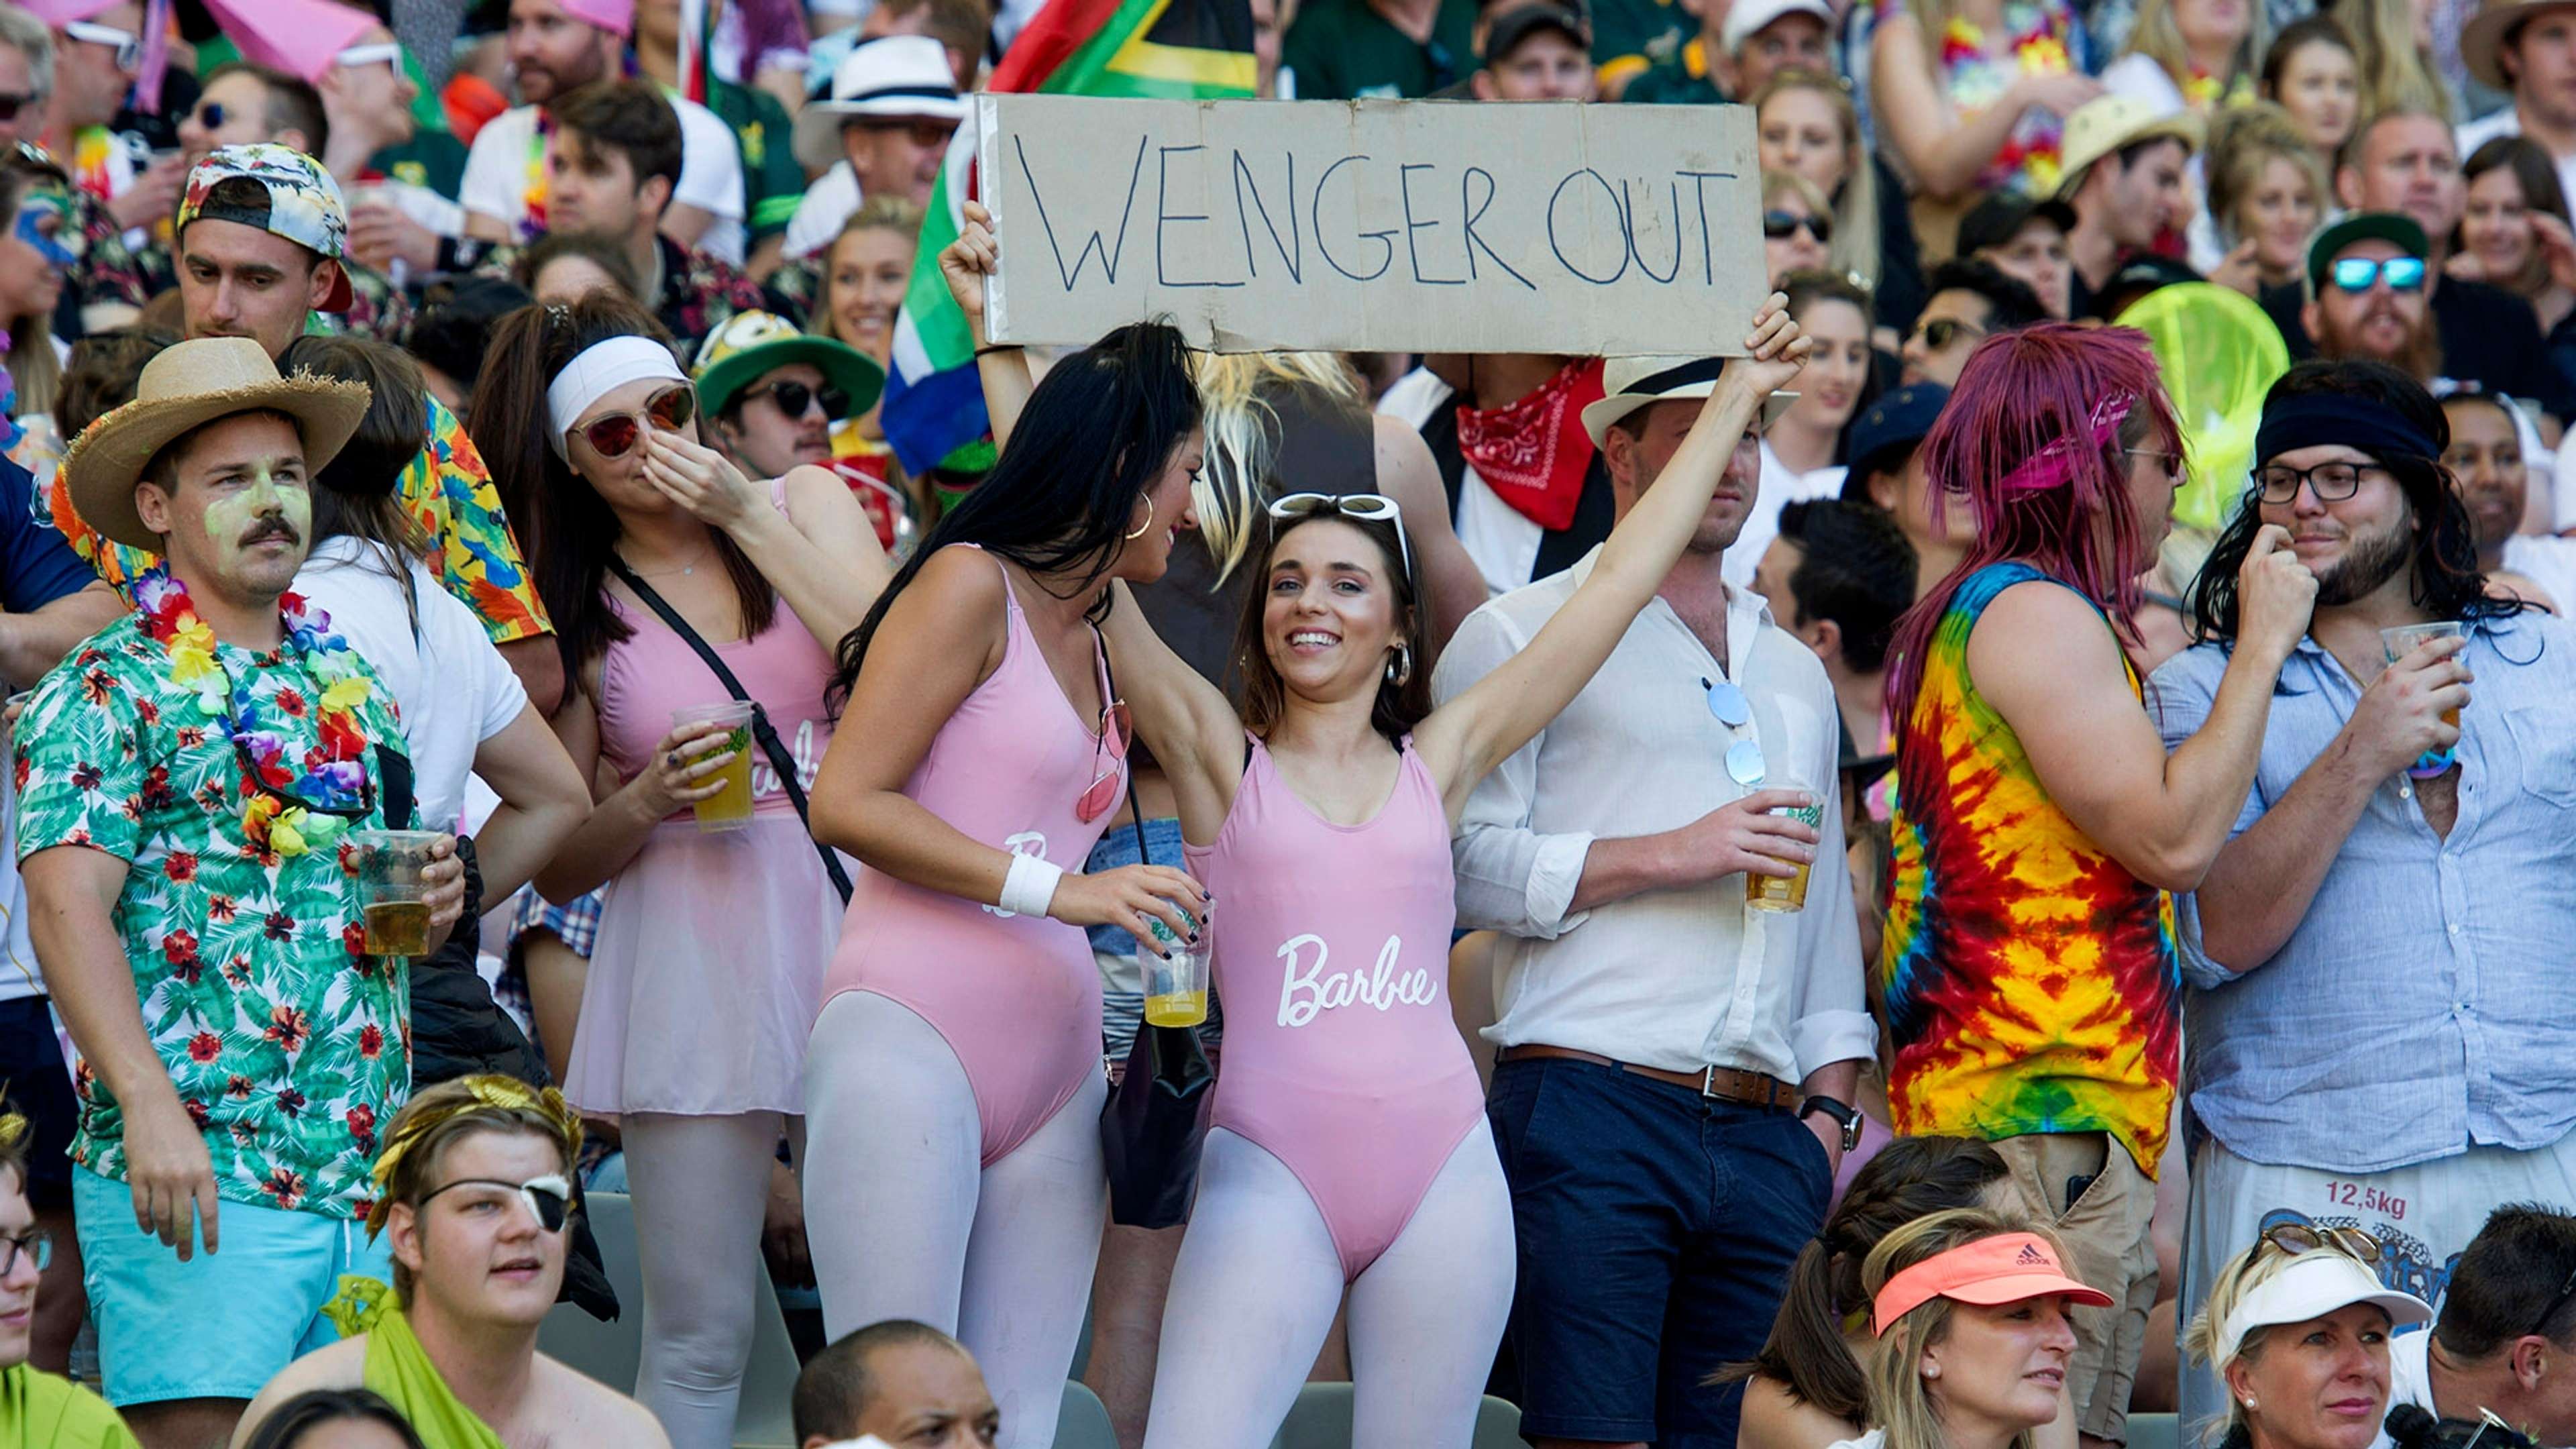 Wenger Out in South Africa